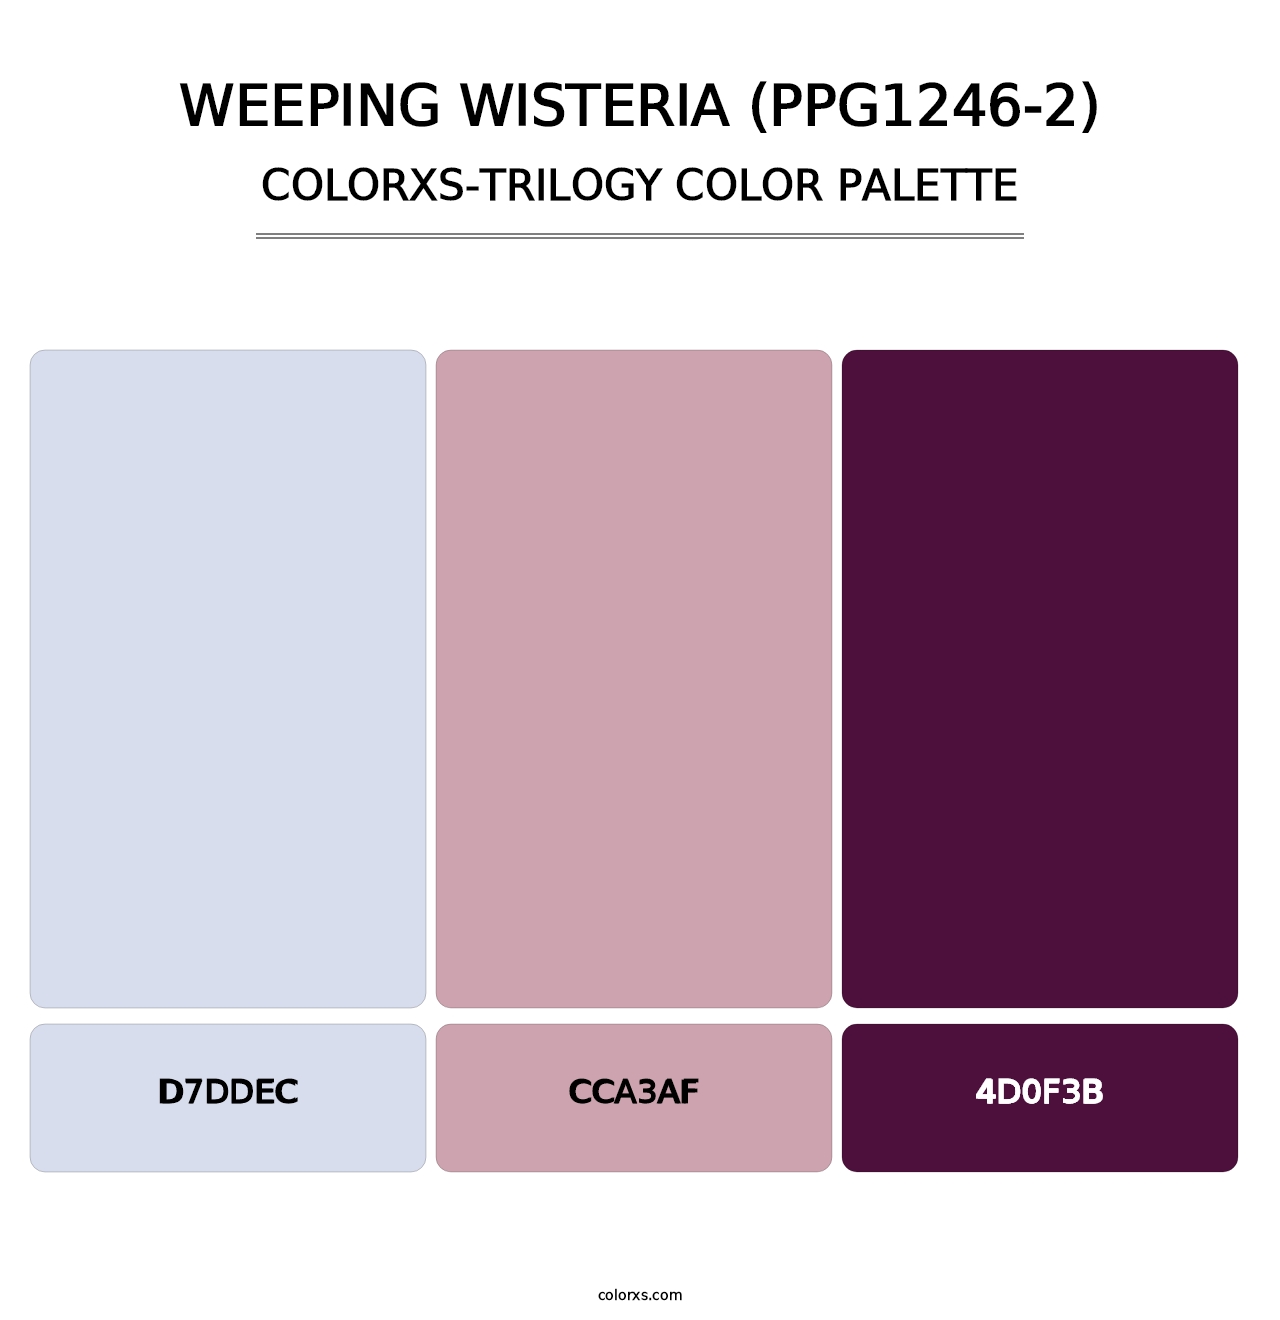 Weeping Wisteria (PPG1246-2) - Colorxs Trilogy Palette